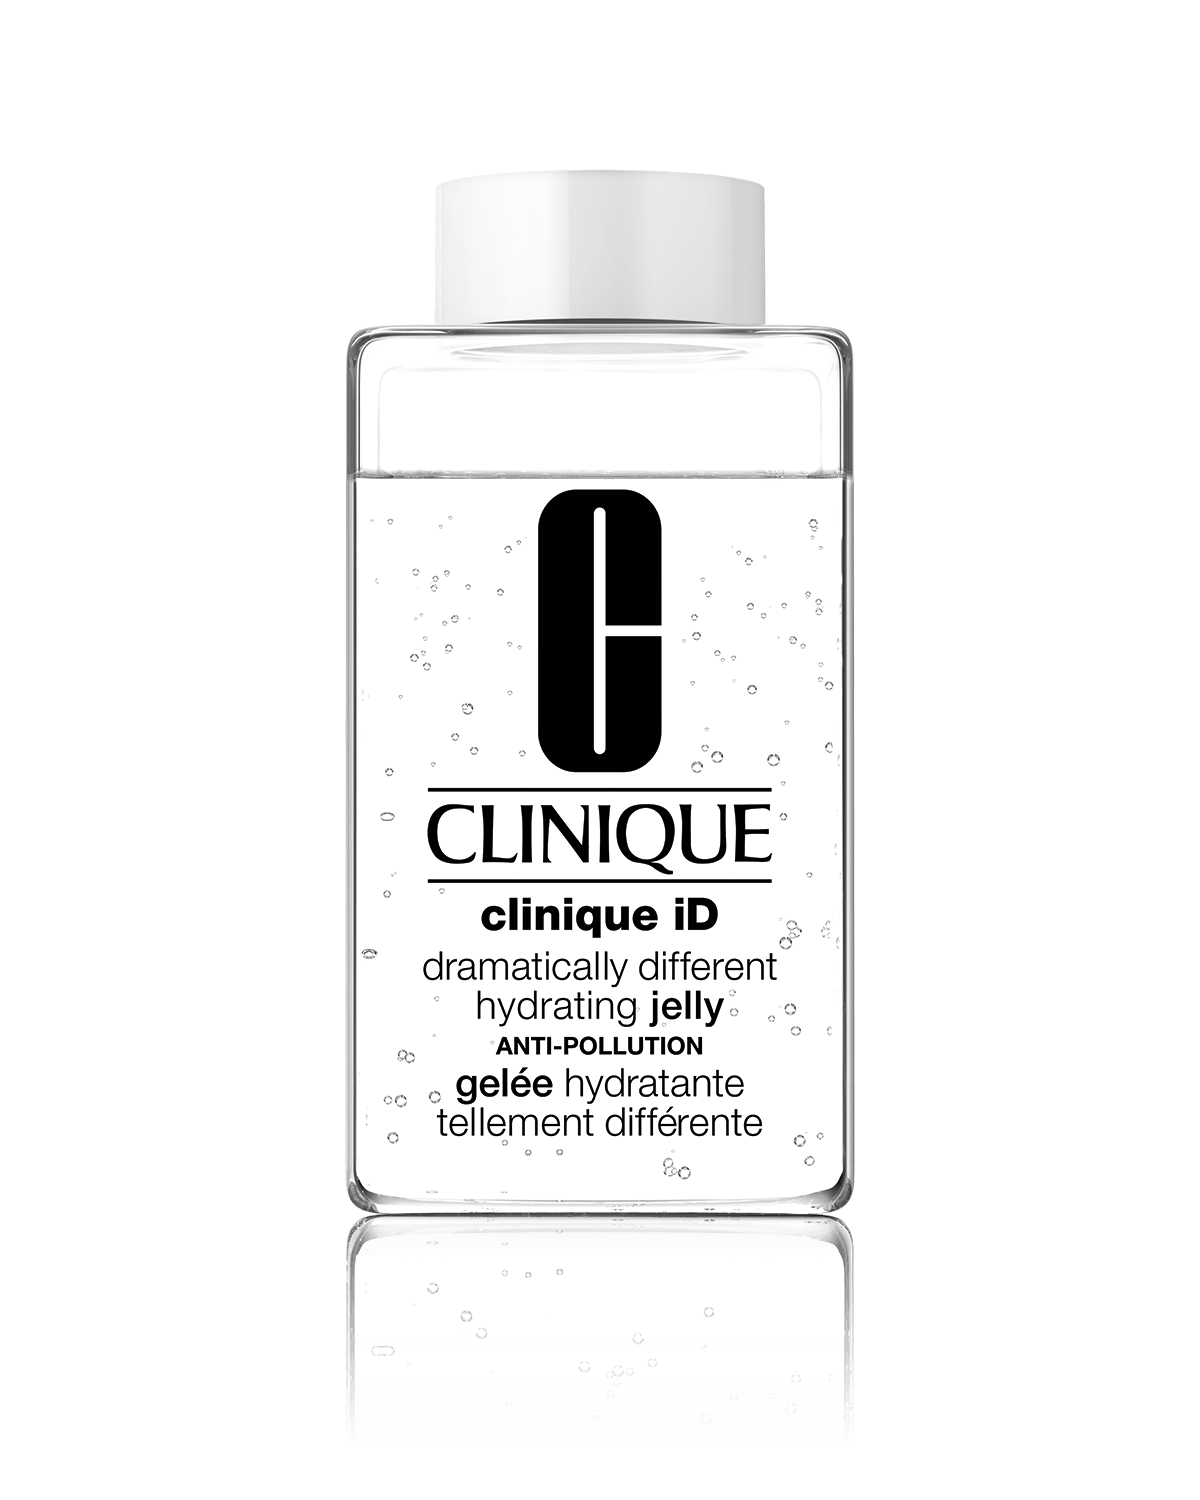 Clinique iD Dramatically Different Hydrating Jelly